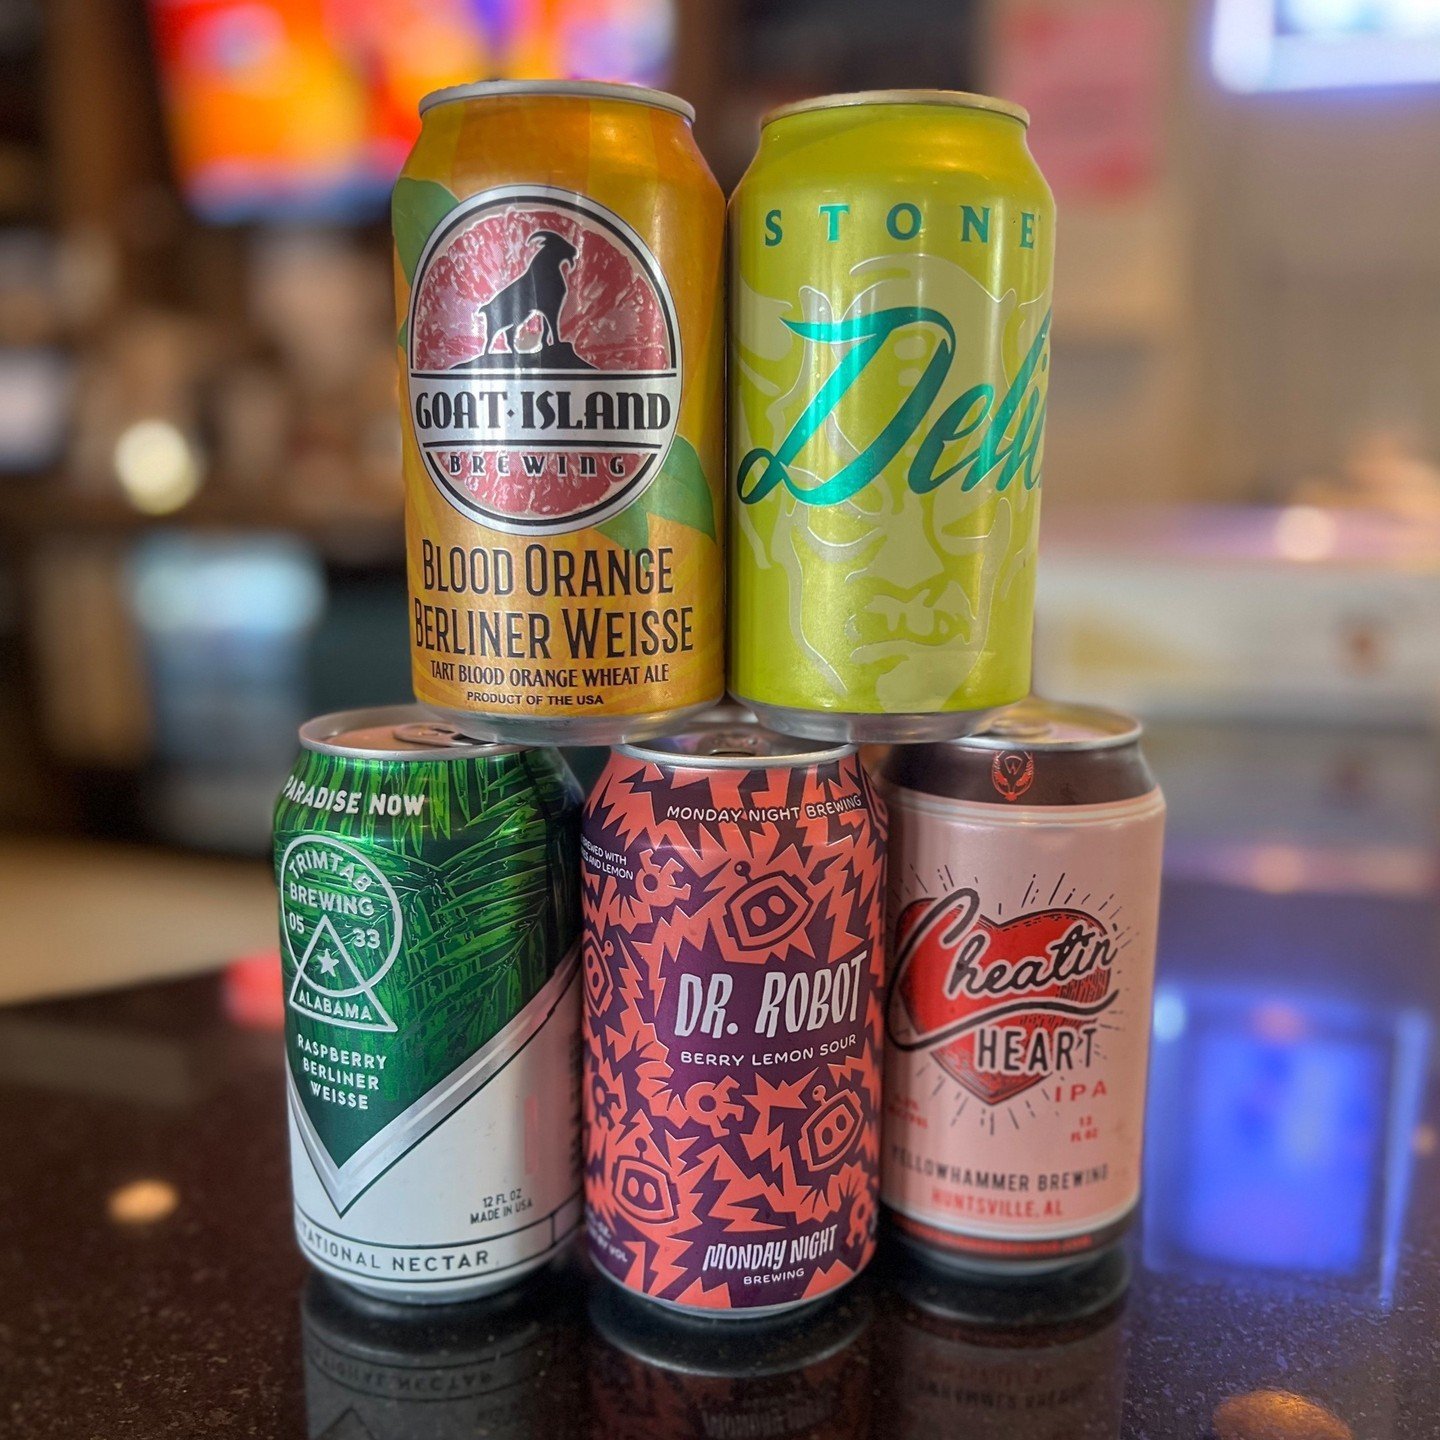 Why wait for the weekend to crack open a cold one? It's Tin Can Tuesday at Slice Pizza &amp; Brew, where all canned beers are just $3!⁠
⁠
Our #TinCanTuesday deals are available at ALL 5️⃣ Slice locations. Not a FAN of the CAN? Join us for Happy Hour 